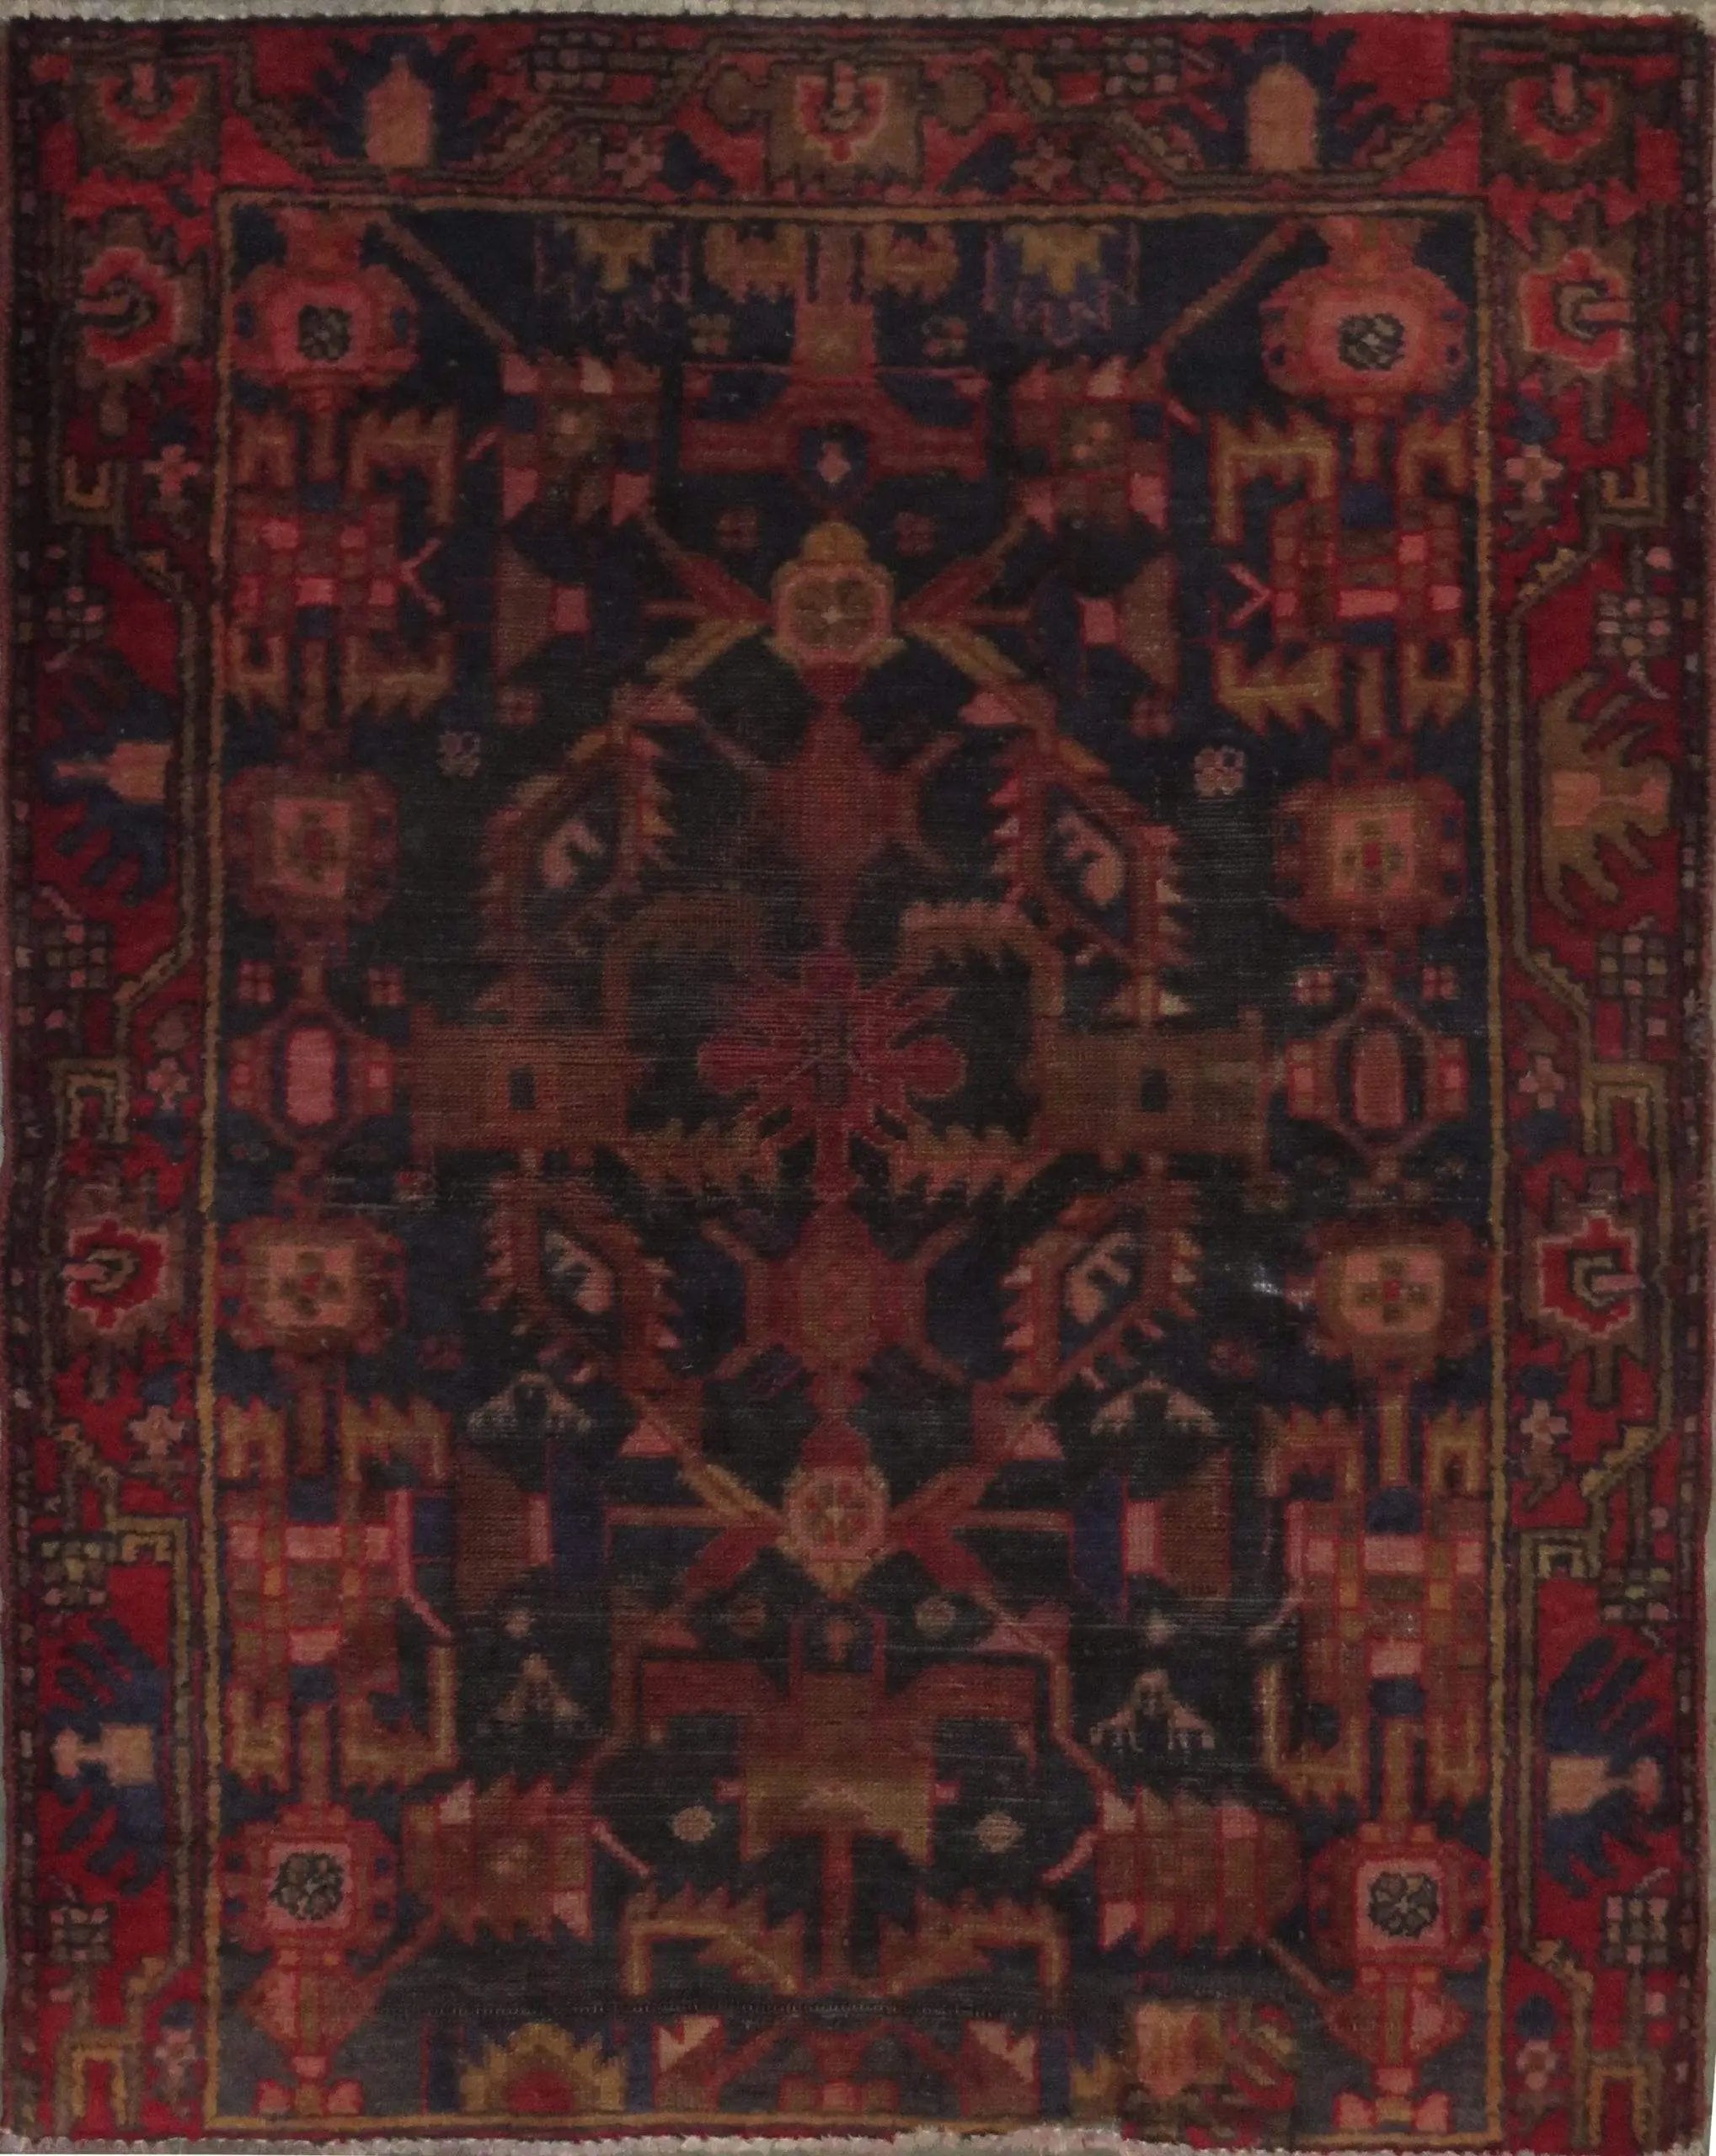 Hand-Knotted Persian Wool Rug _ Luxurious Vintage Design, 4'4" x 3'6", Artisan Crafted